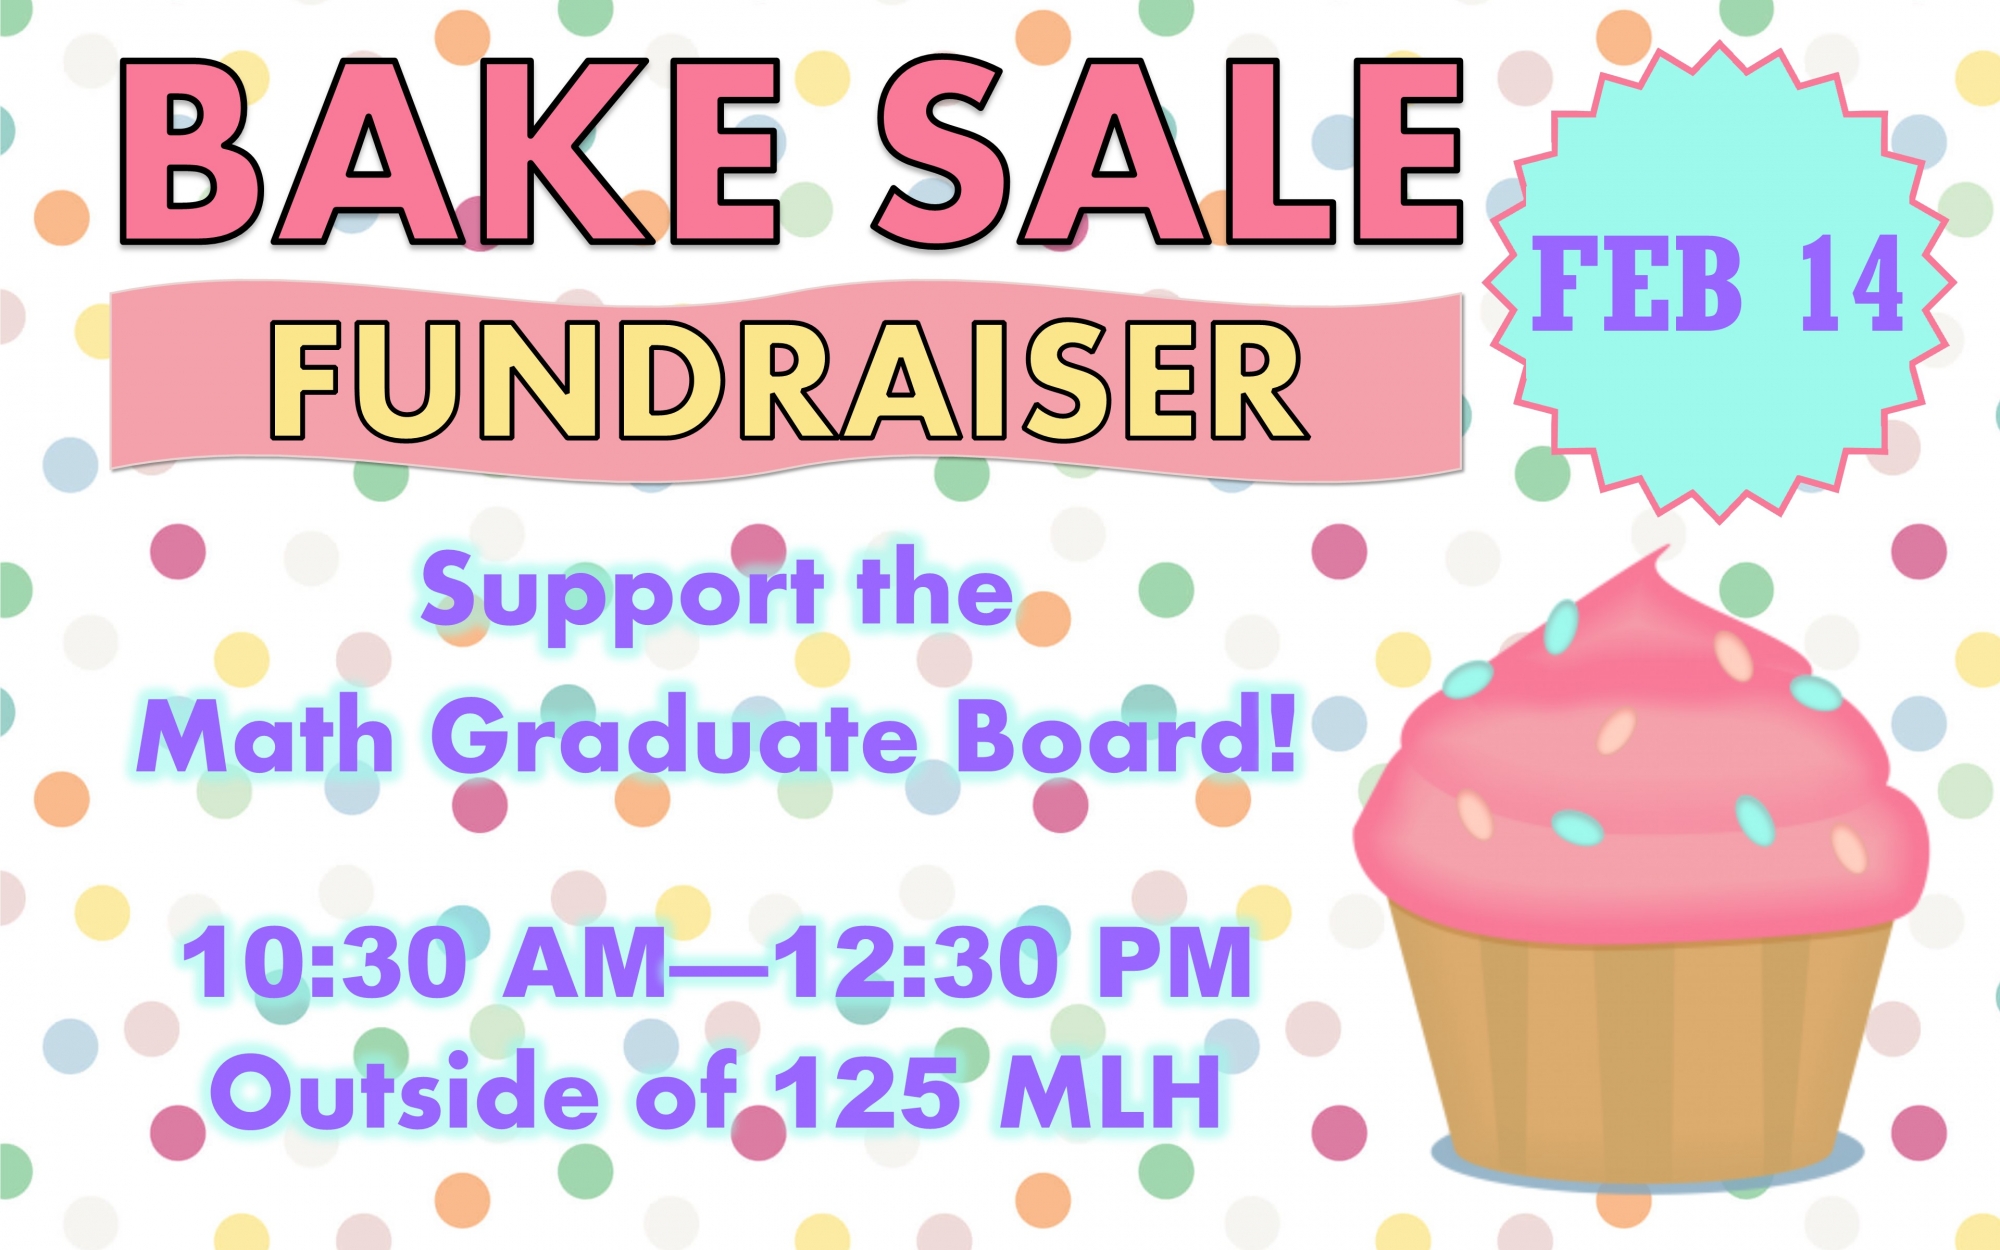 Bake Sale Fundraiser Support the Math Graduate Board! Feb 14 10:30 AM - 12:30 PM Outside of 125 MLH